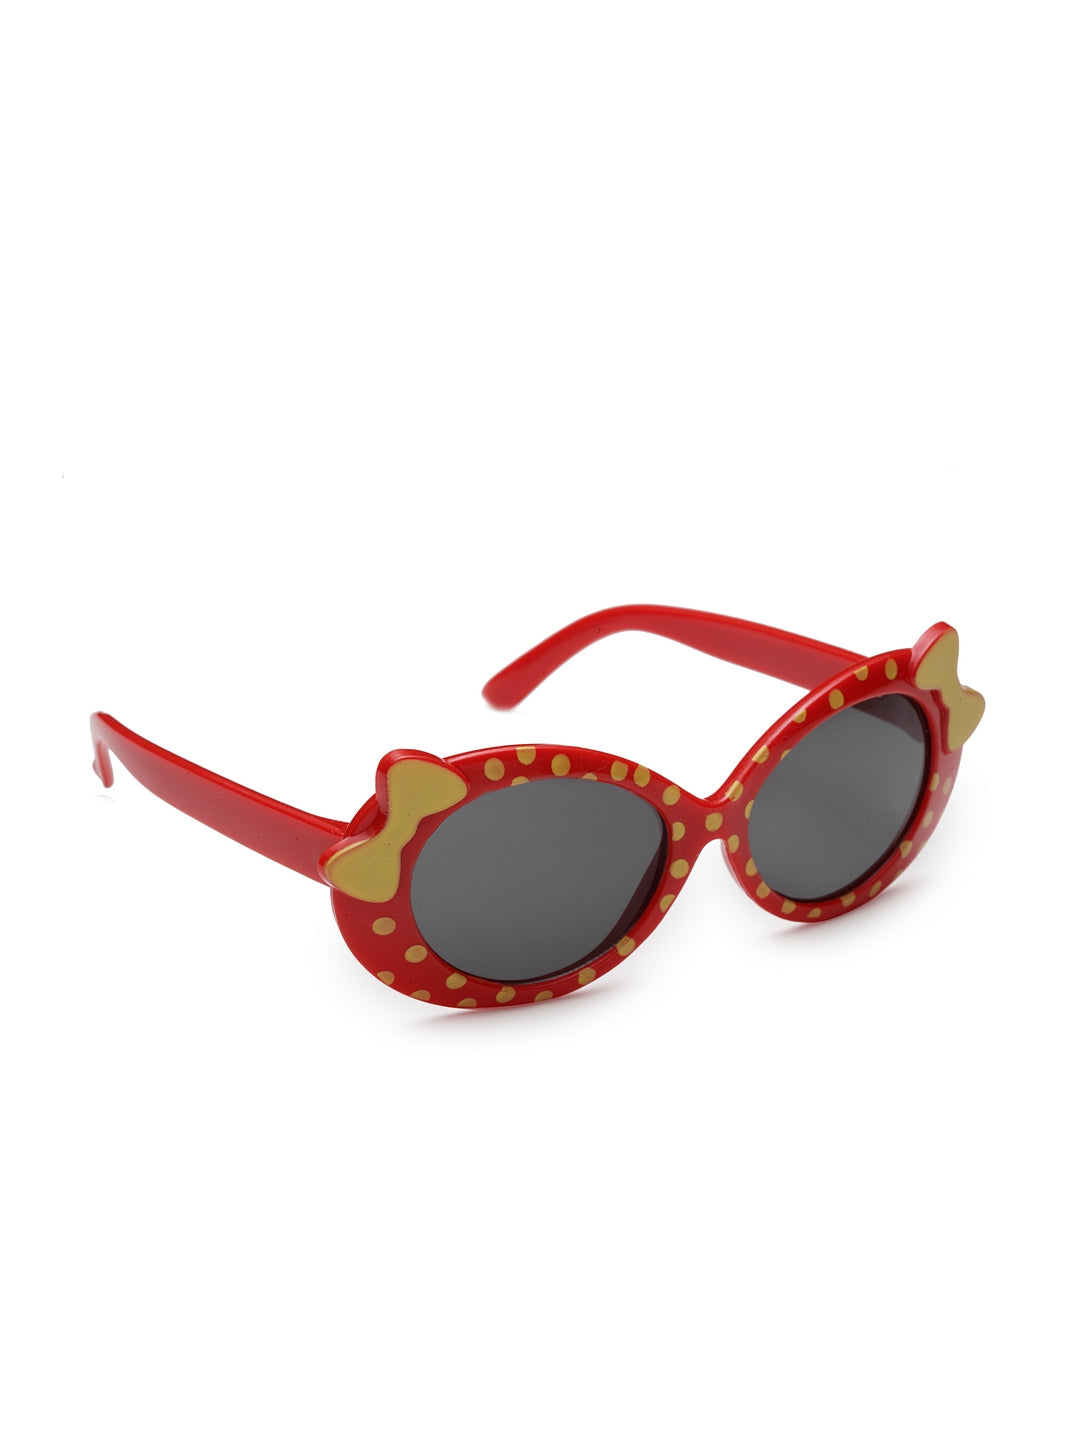 Stol'n Premium Attractive Fashionable UV-Protected Cat Eye Sunglasses - Red